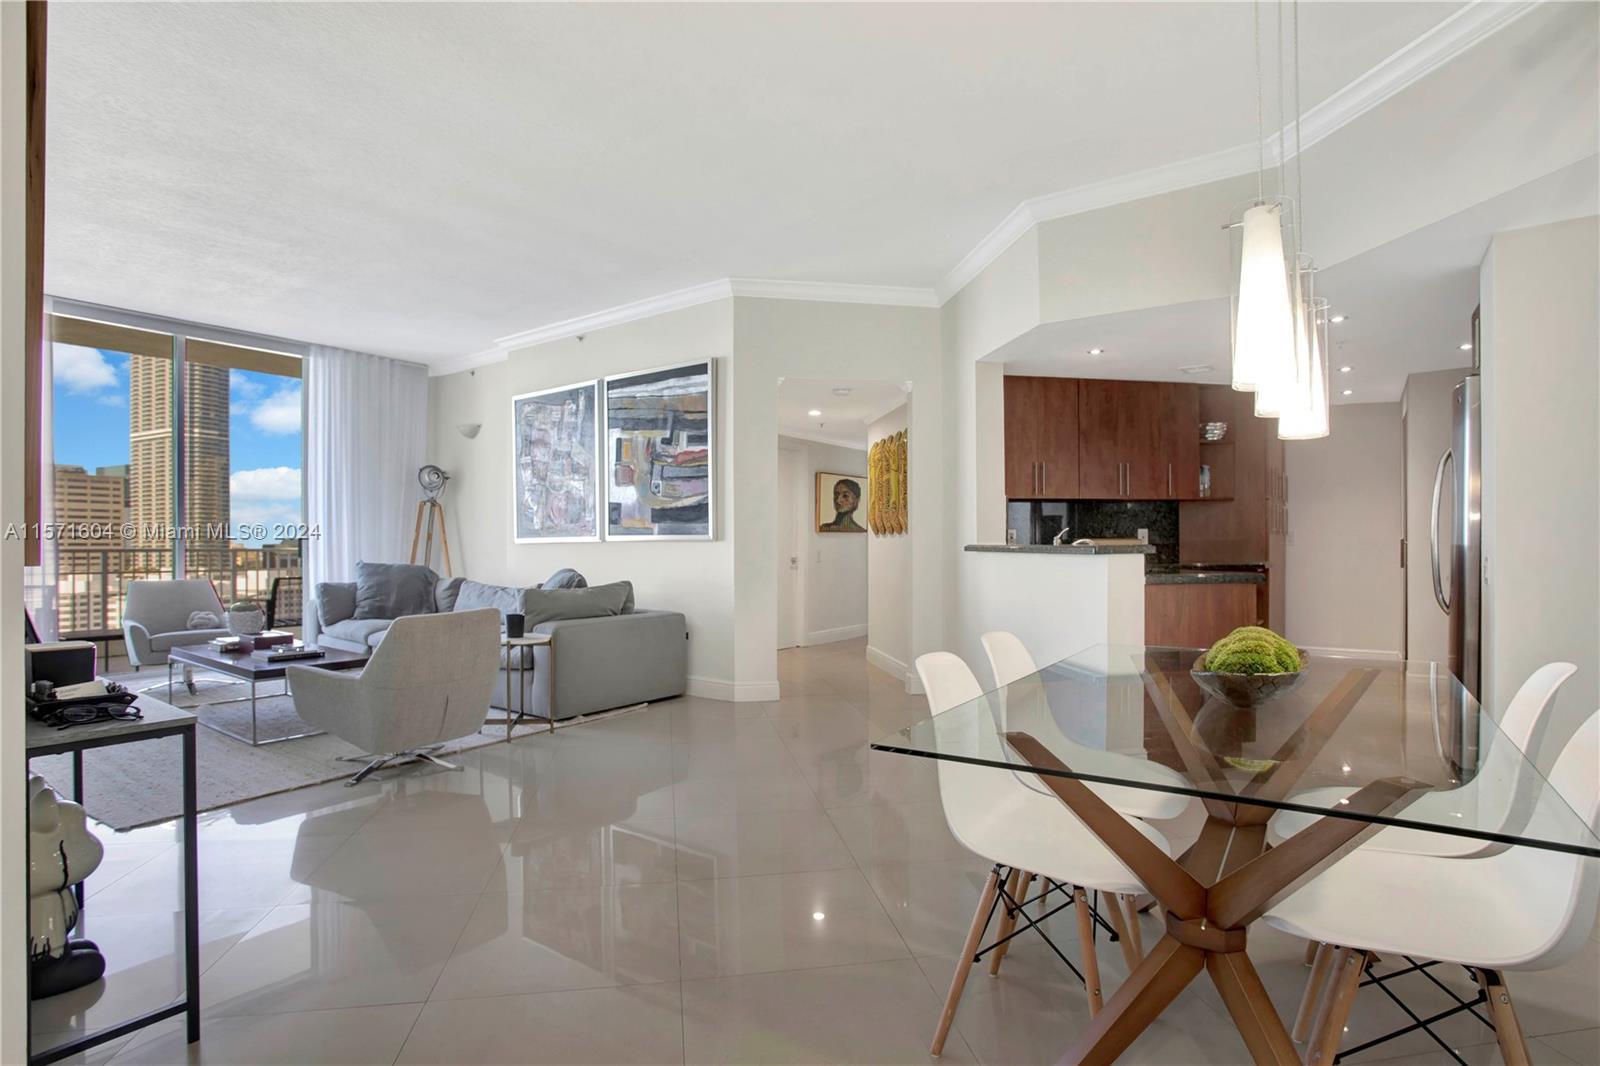 Spectacular Penthouse at Courvoisier Brickell Key. This spacious 3 bed/2.5 bath unit laid out over 1